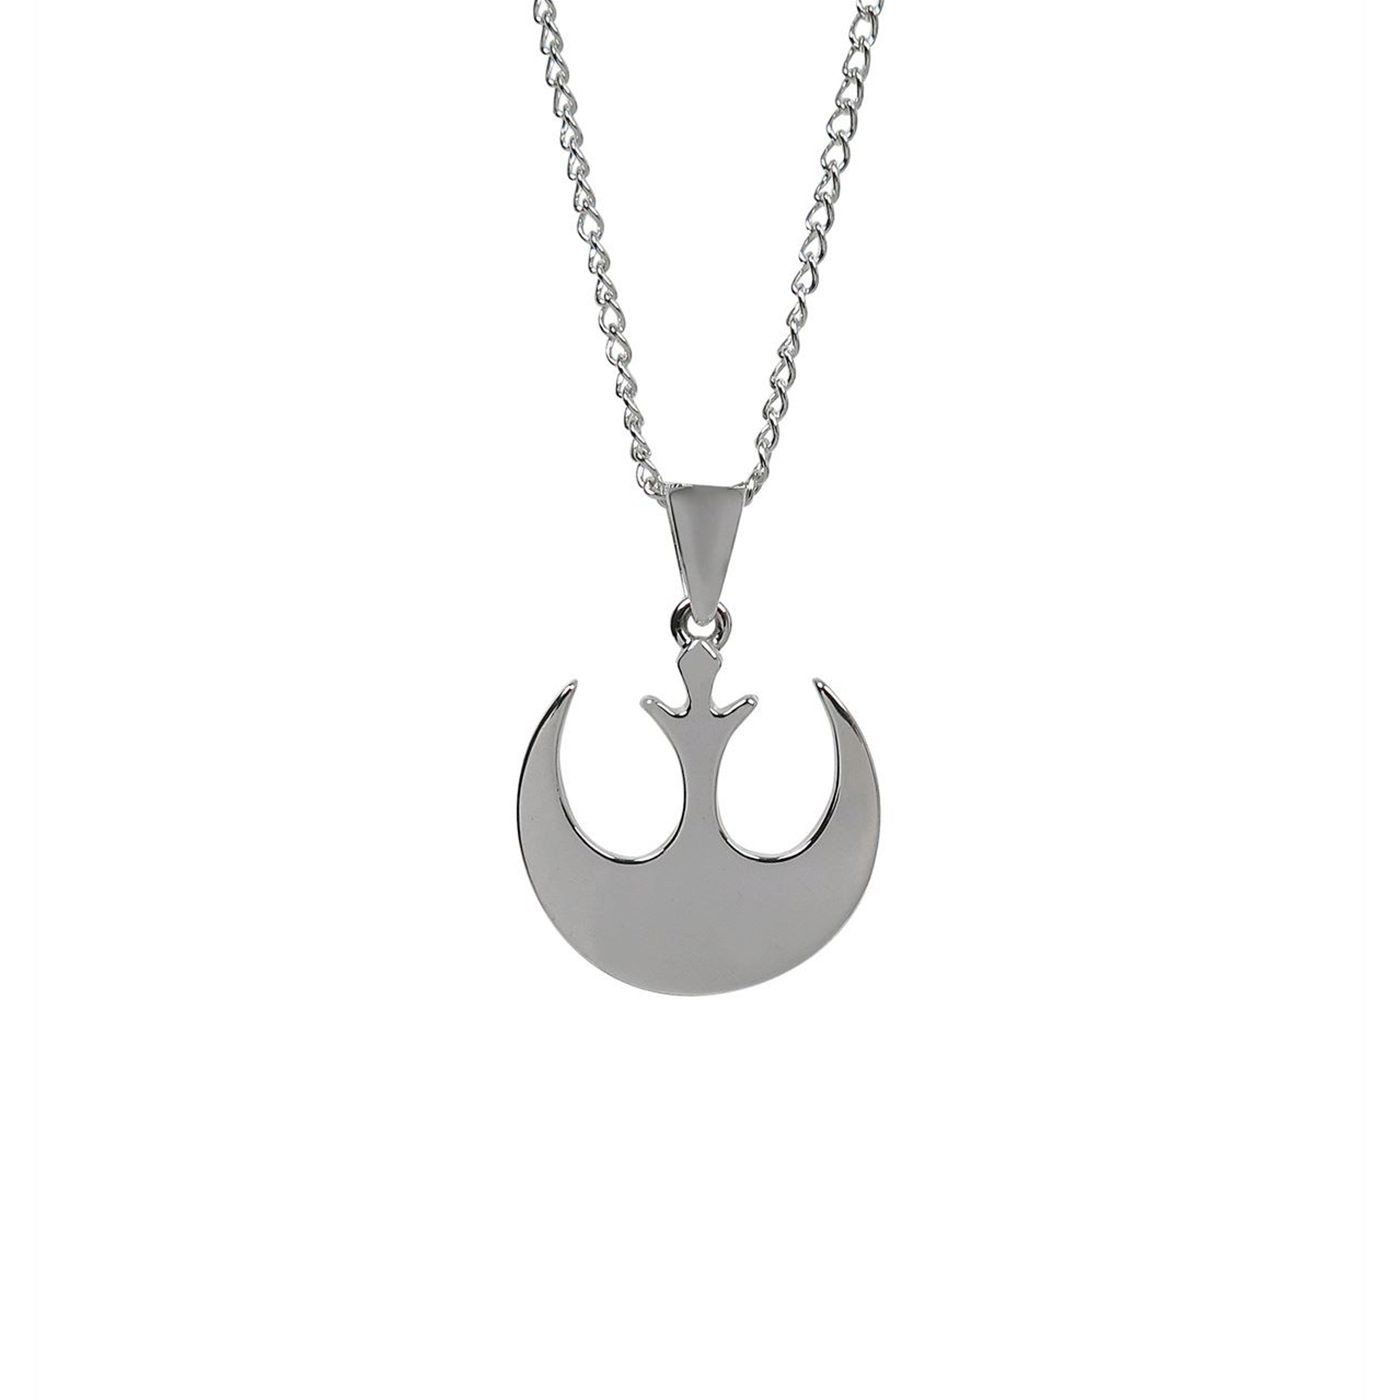 Star Wars Rebel Alliance Silver Plated Necklace